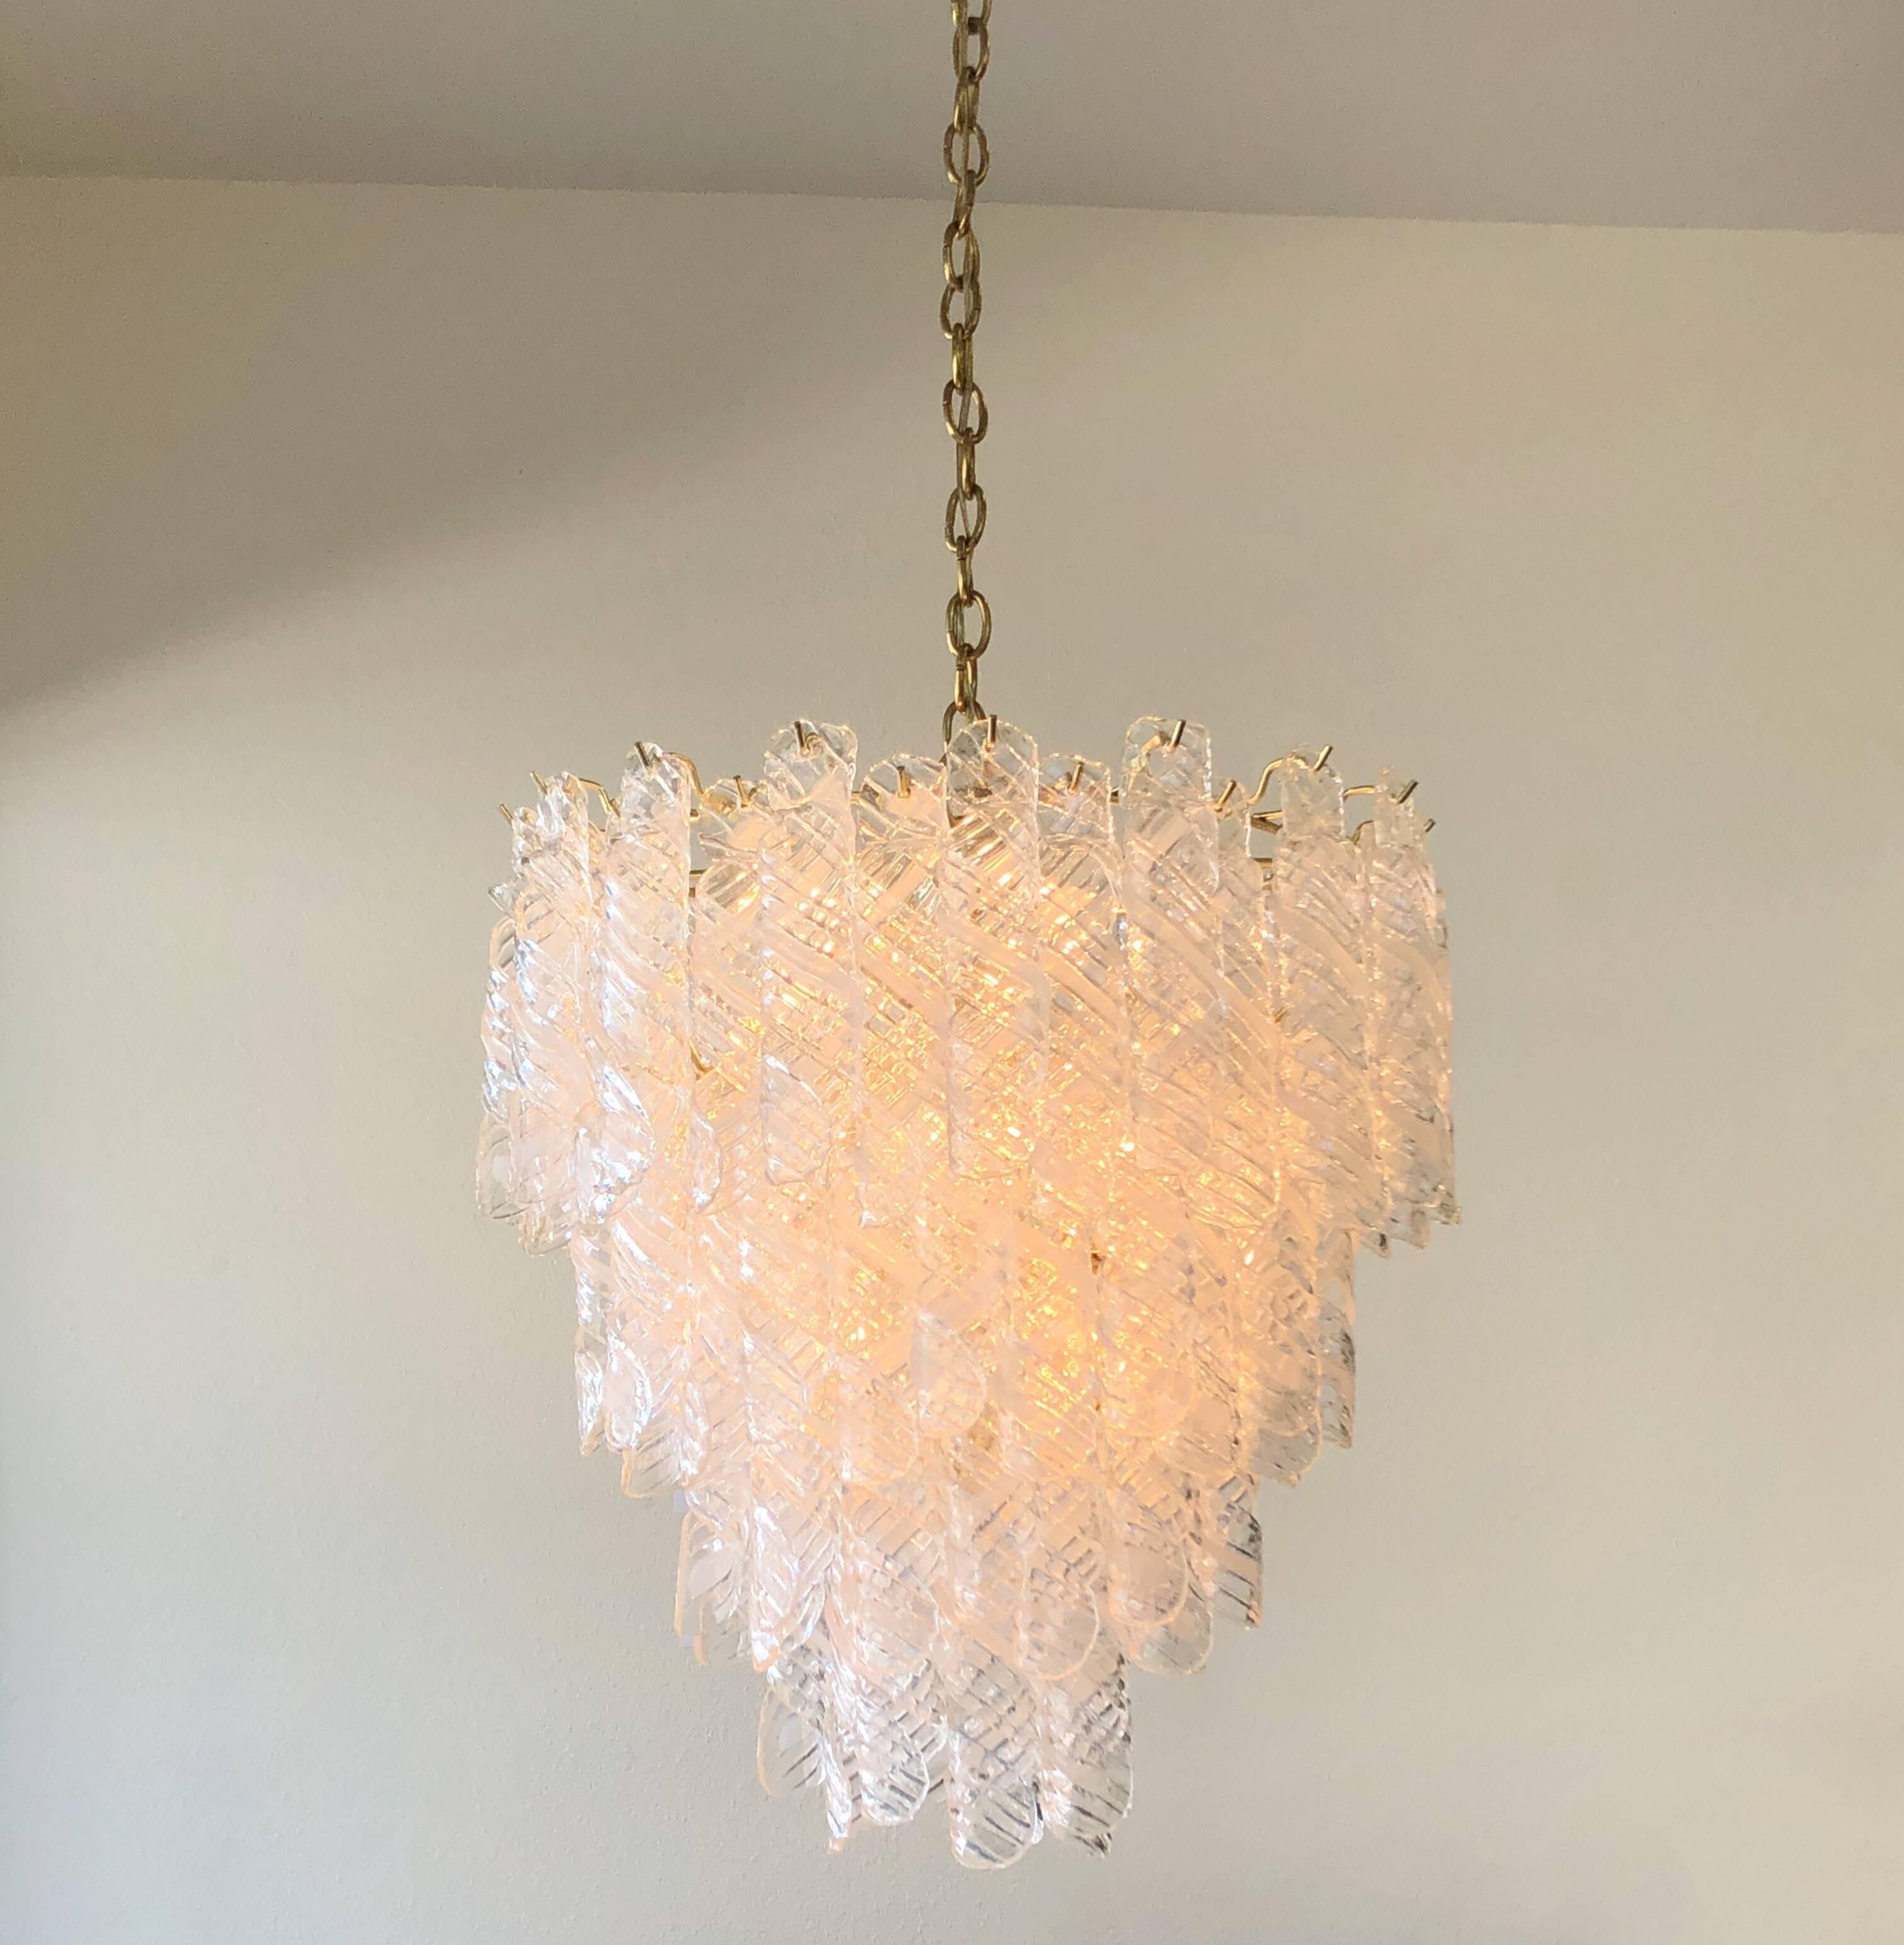 A spectacular Italian Murano glass and brass chandelier, design by Mazzega in the 1970s.
Newly rewired. We can extend or shorten the chain to any length. 
Dimensions without chain: 27” high 24” diameter.
 